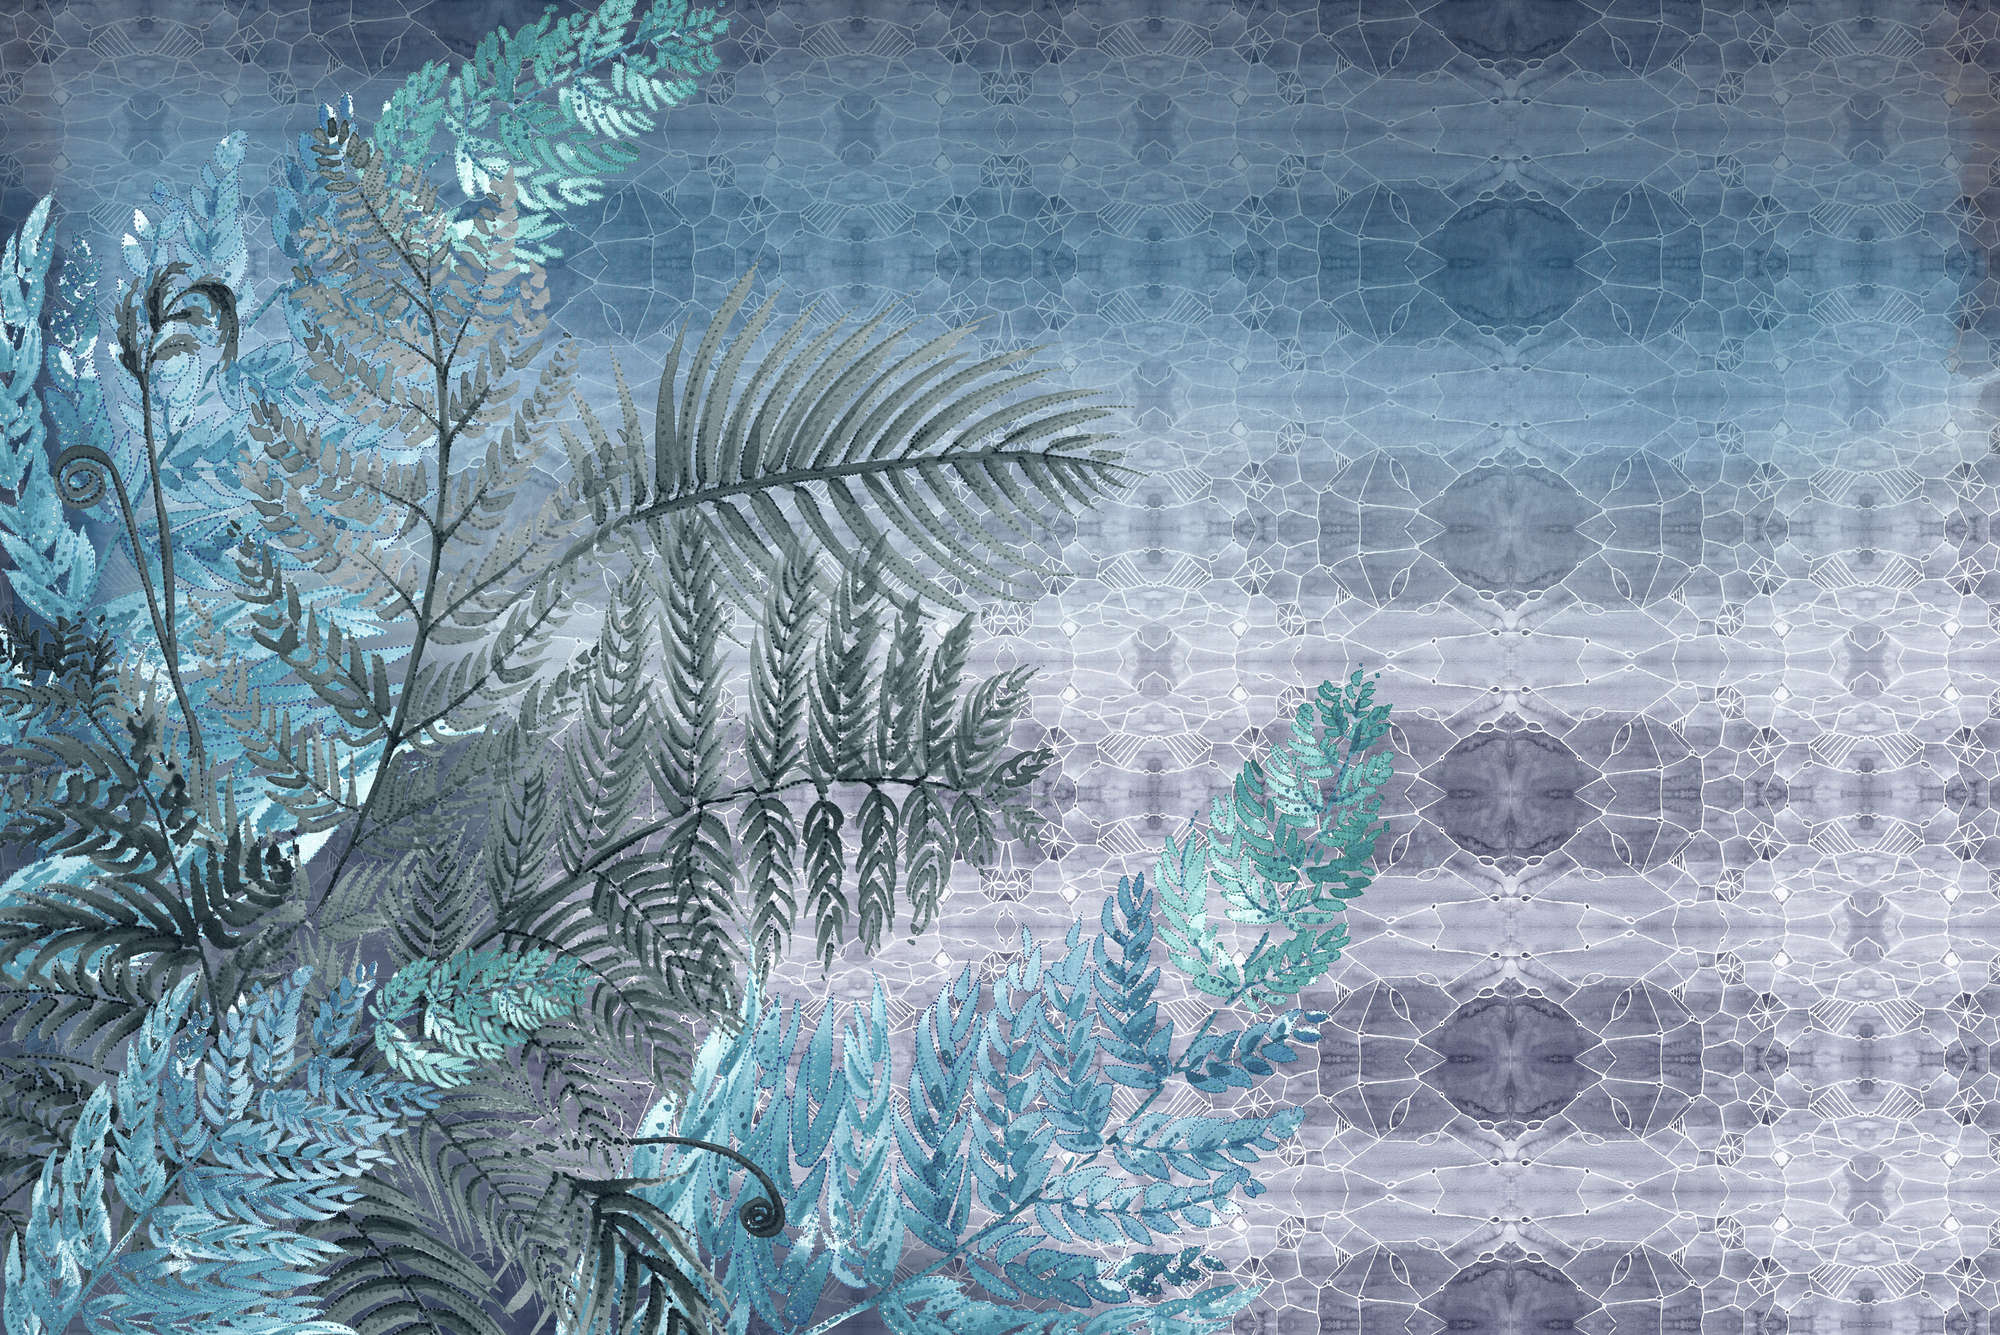             Watercolour photo wallpaper fern pattern in blue and purple on textured non-woven
        